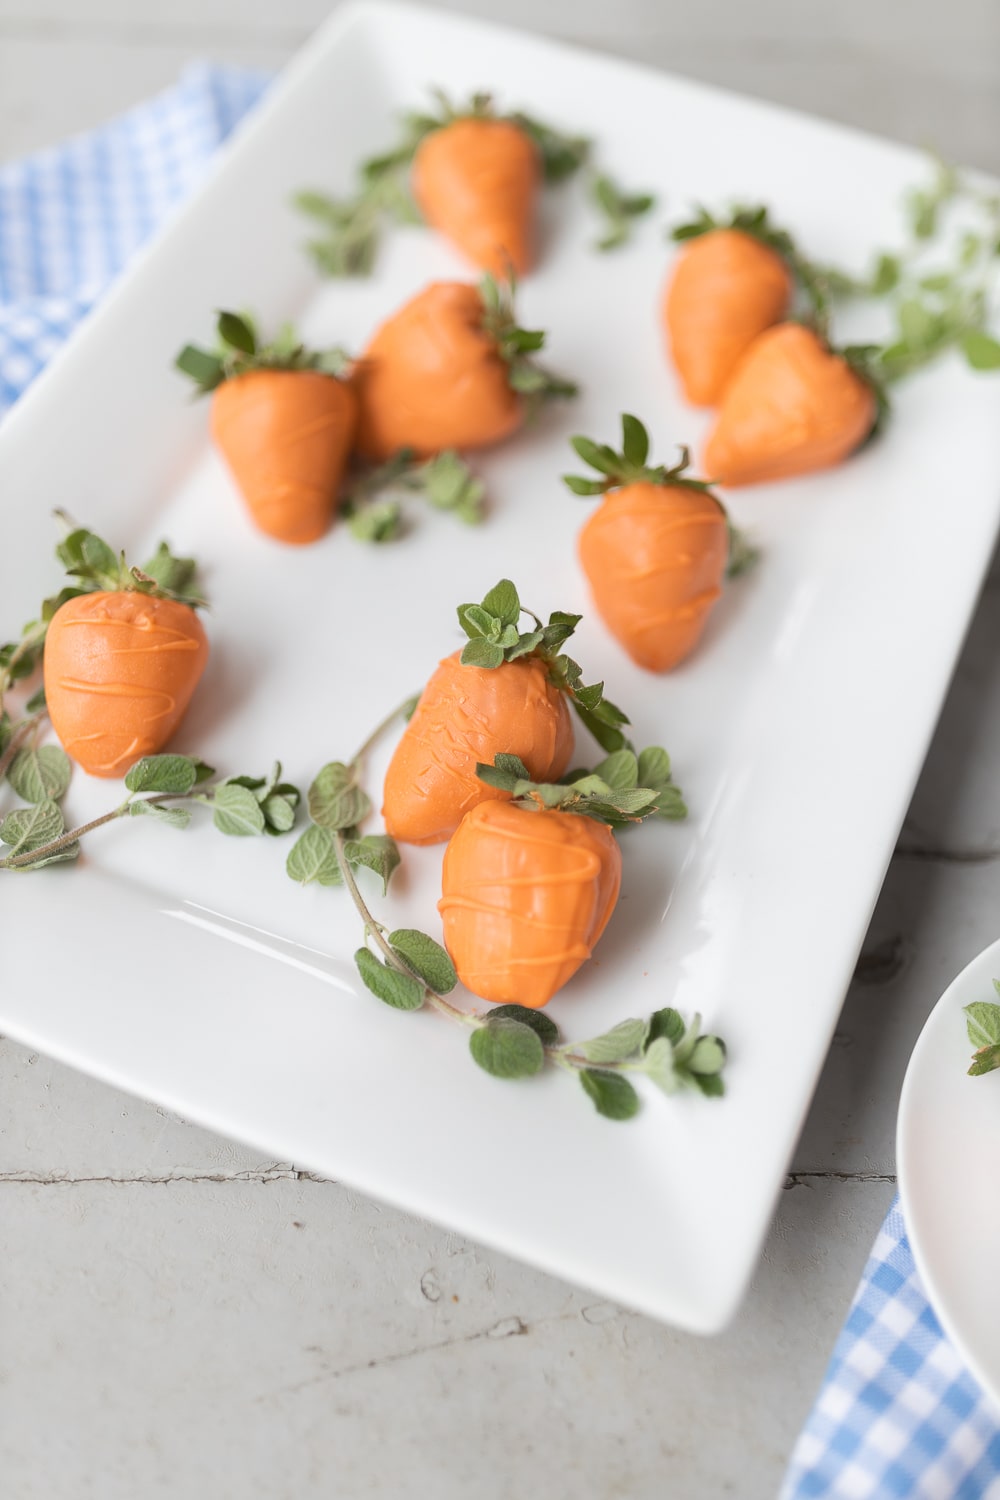 Chocolate covered strawberry carrots made by blogger Stephanie Ziajka on Diary of a Debutante